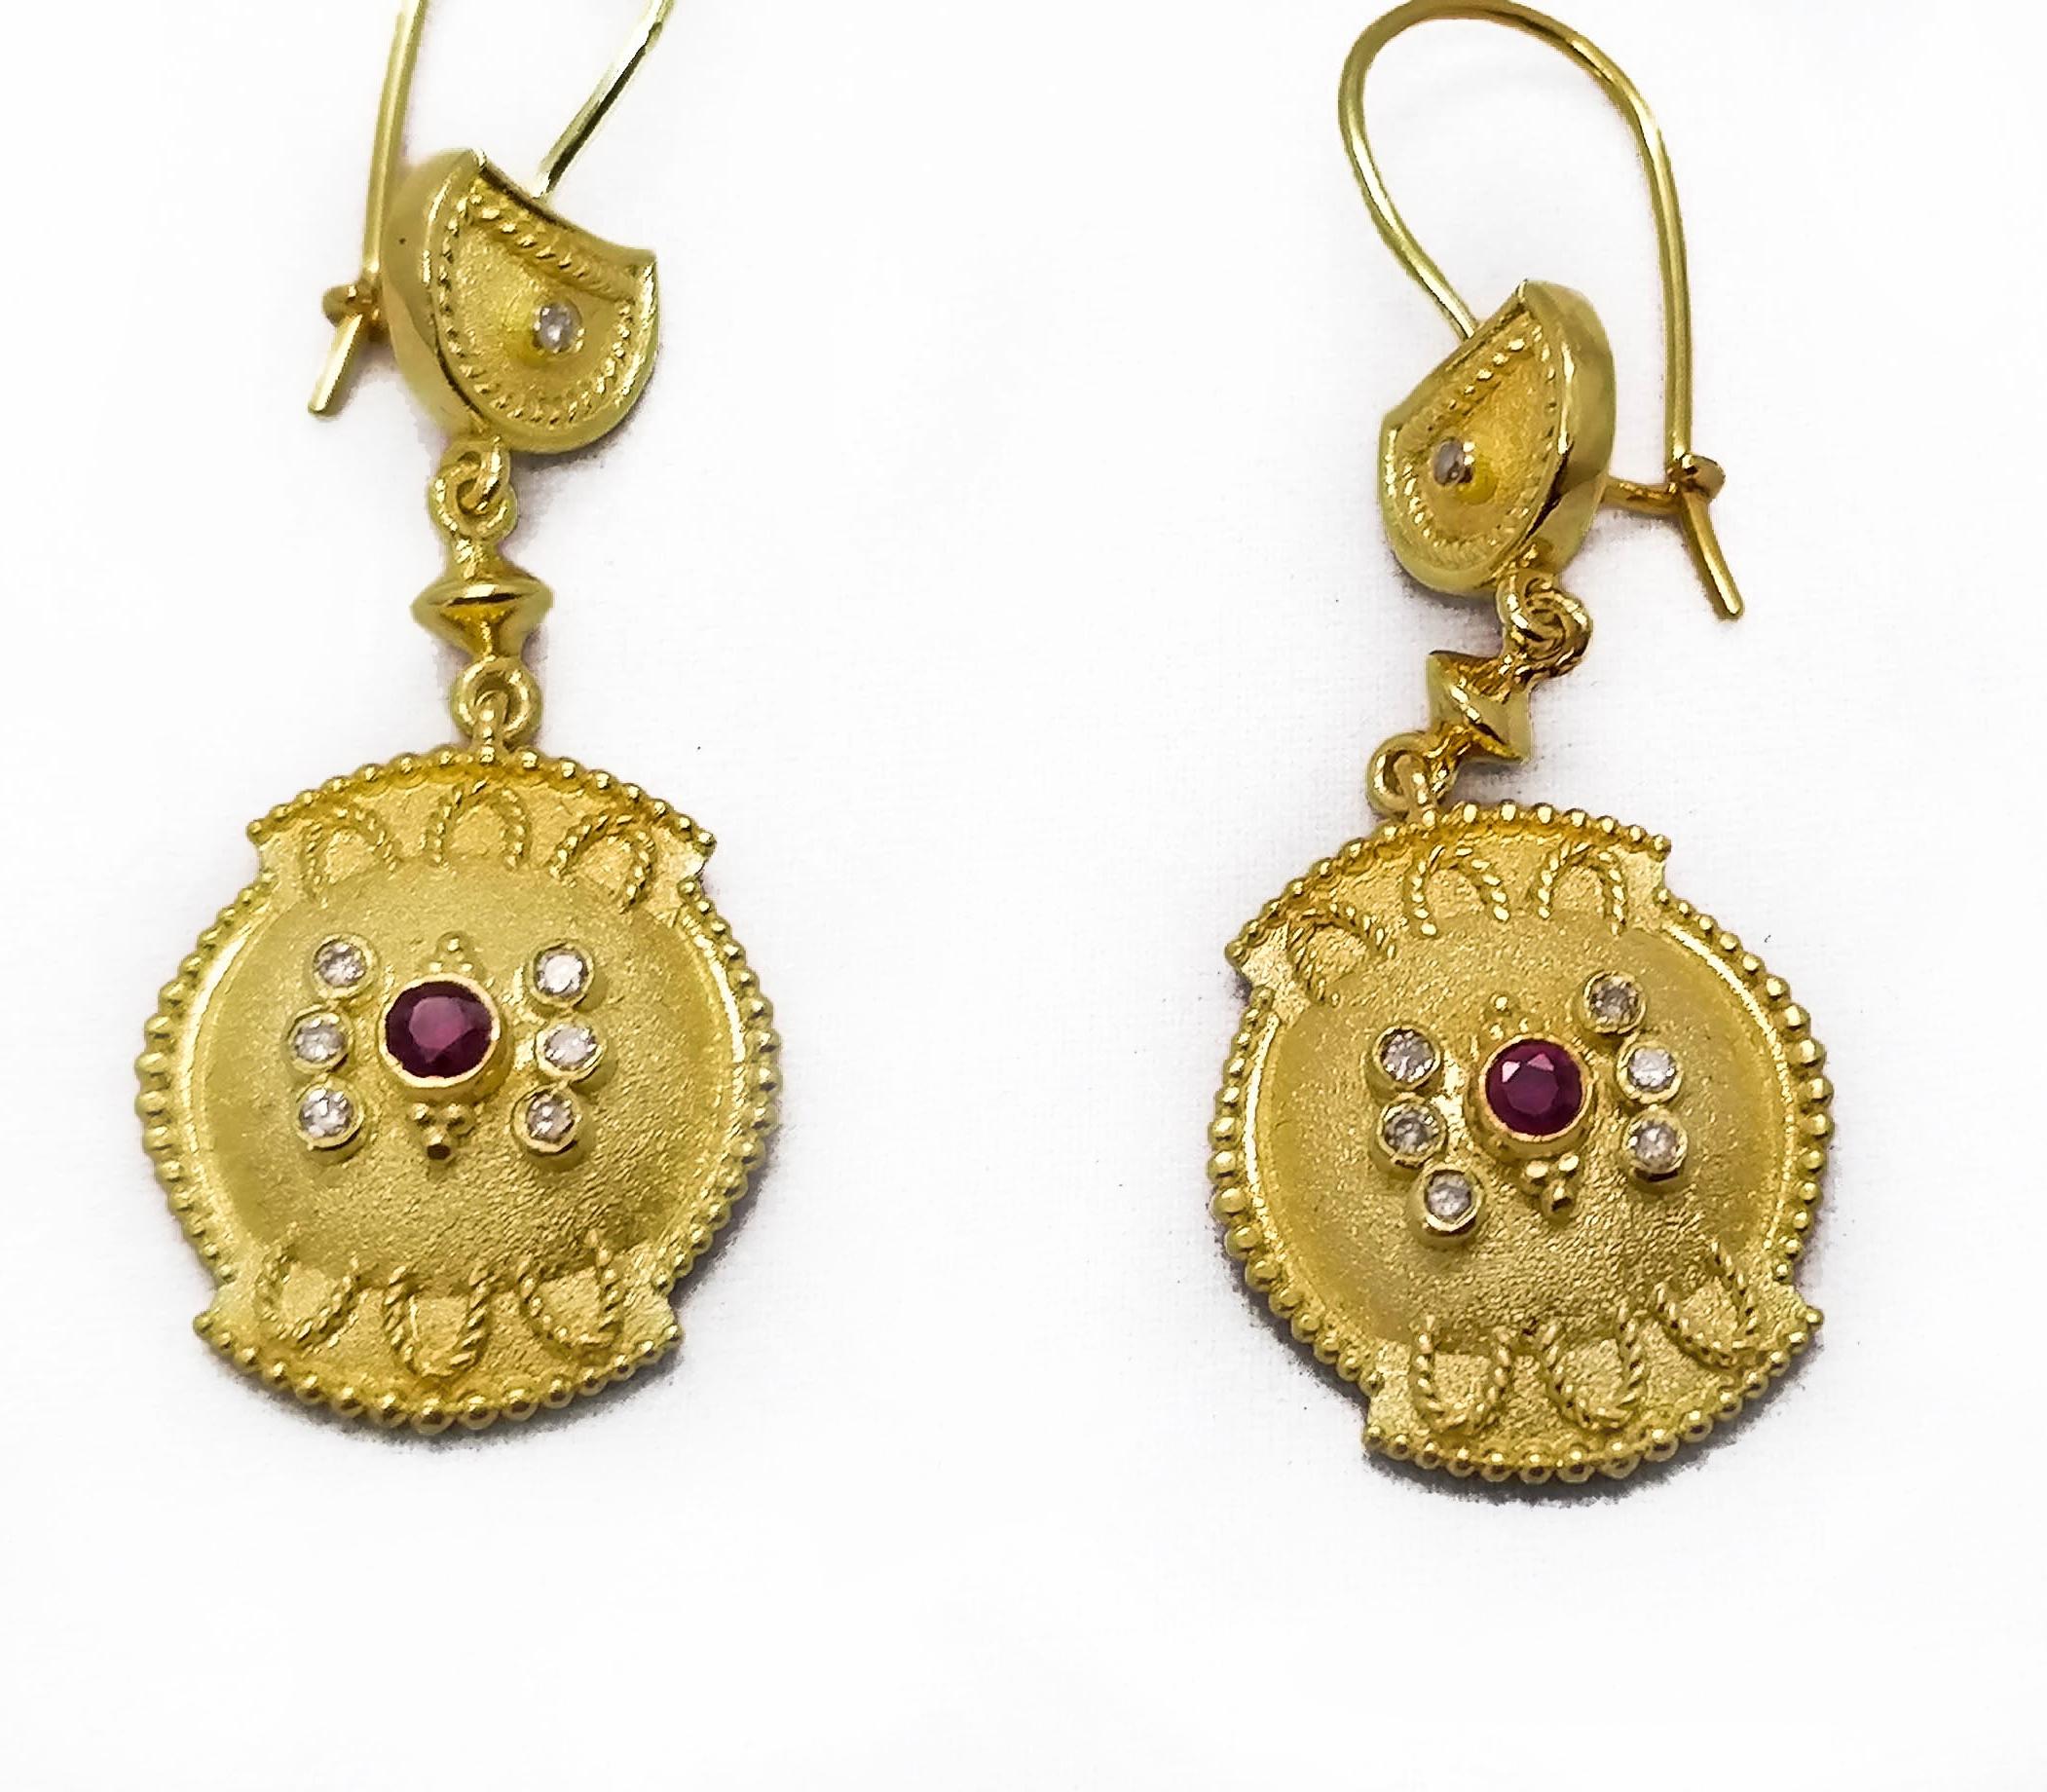 These S.Georgios designer earrings are hand made from 18 Karat Yellow Gold and decorated with Byzantine-era style granulation workmanship done all microscopically. This stunning pair of dangle earrings feature 2 brilliant-cut natural Rubies total